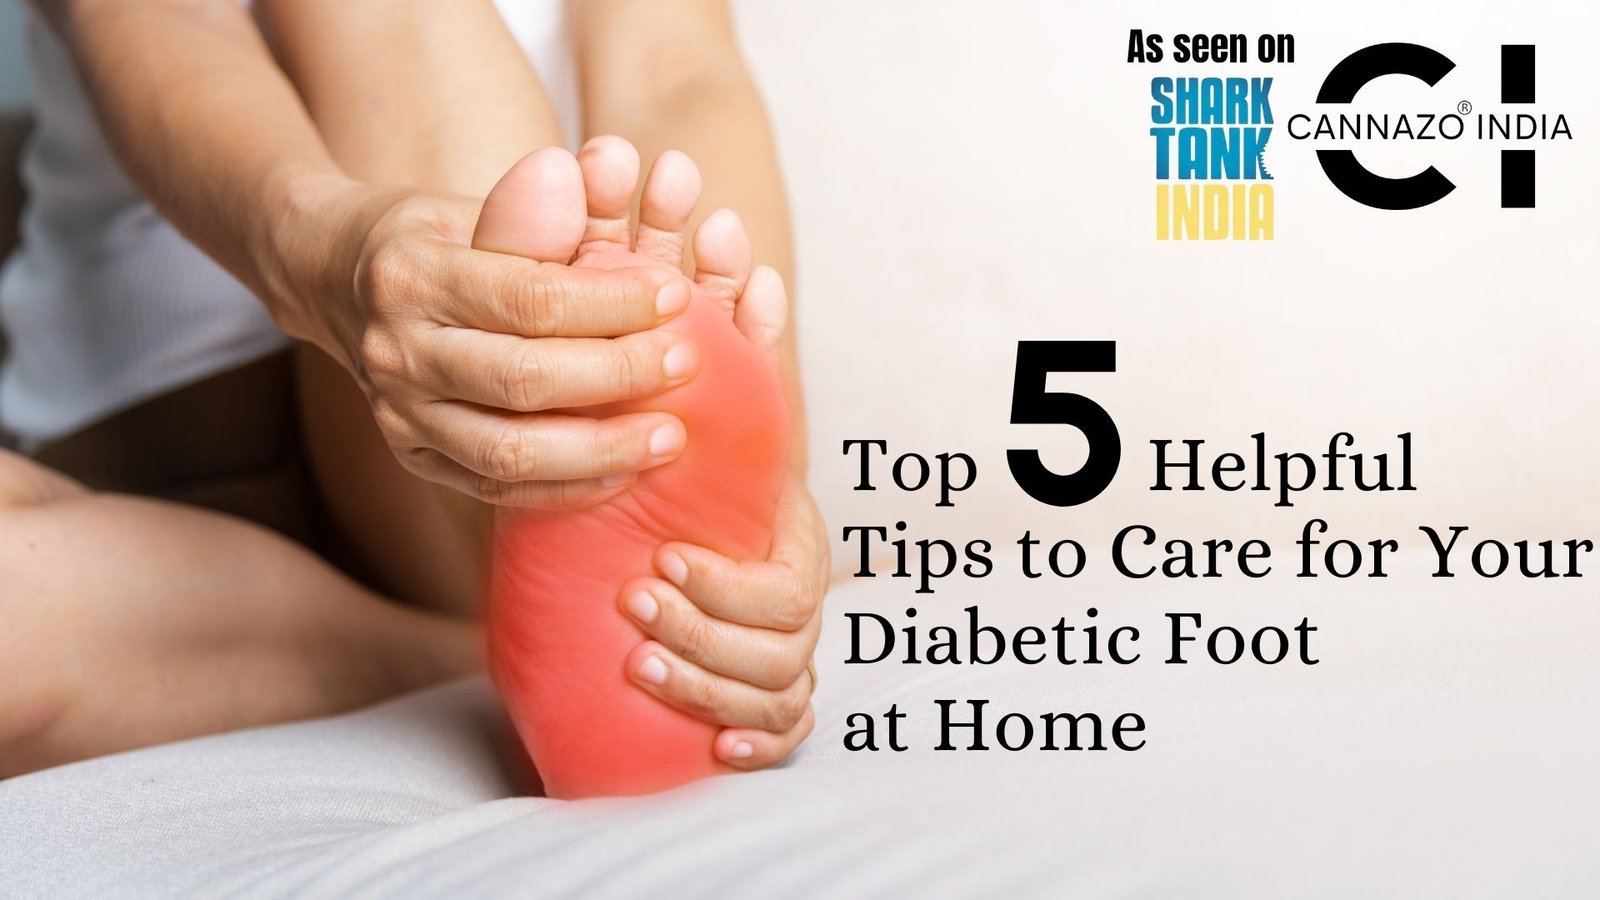 Expert Tips: Caring for Diabetic Feet at Home Made Easy